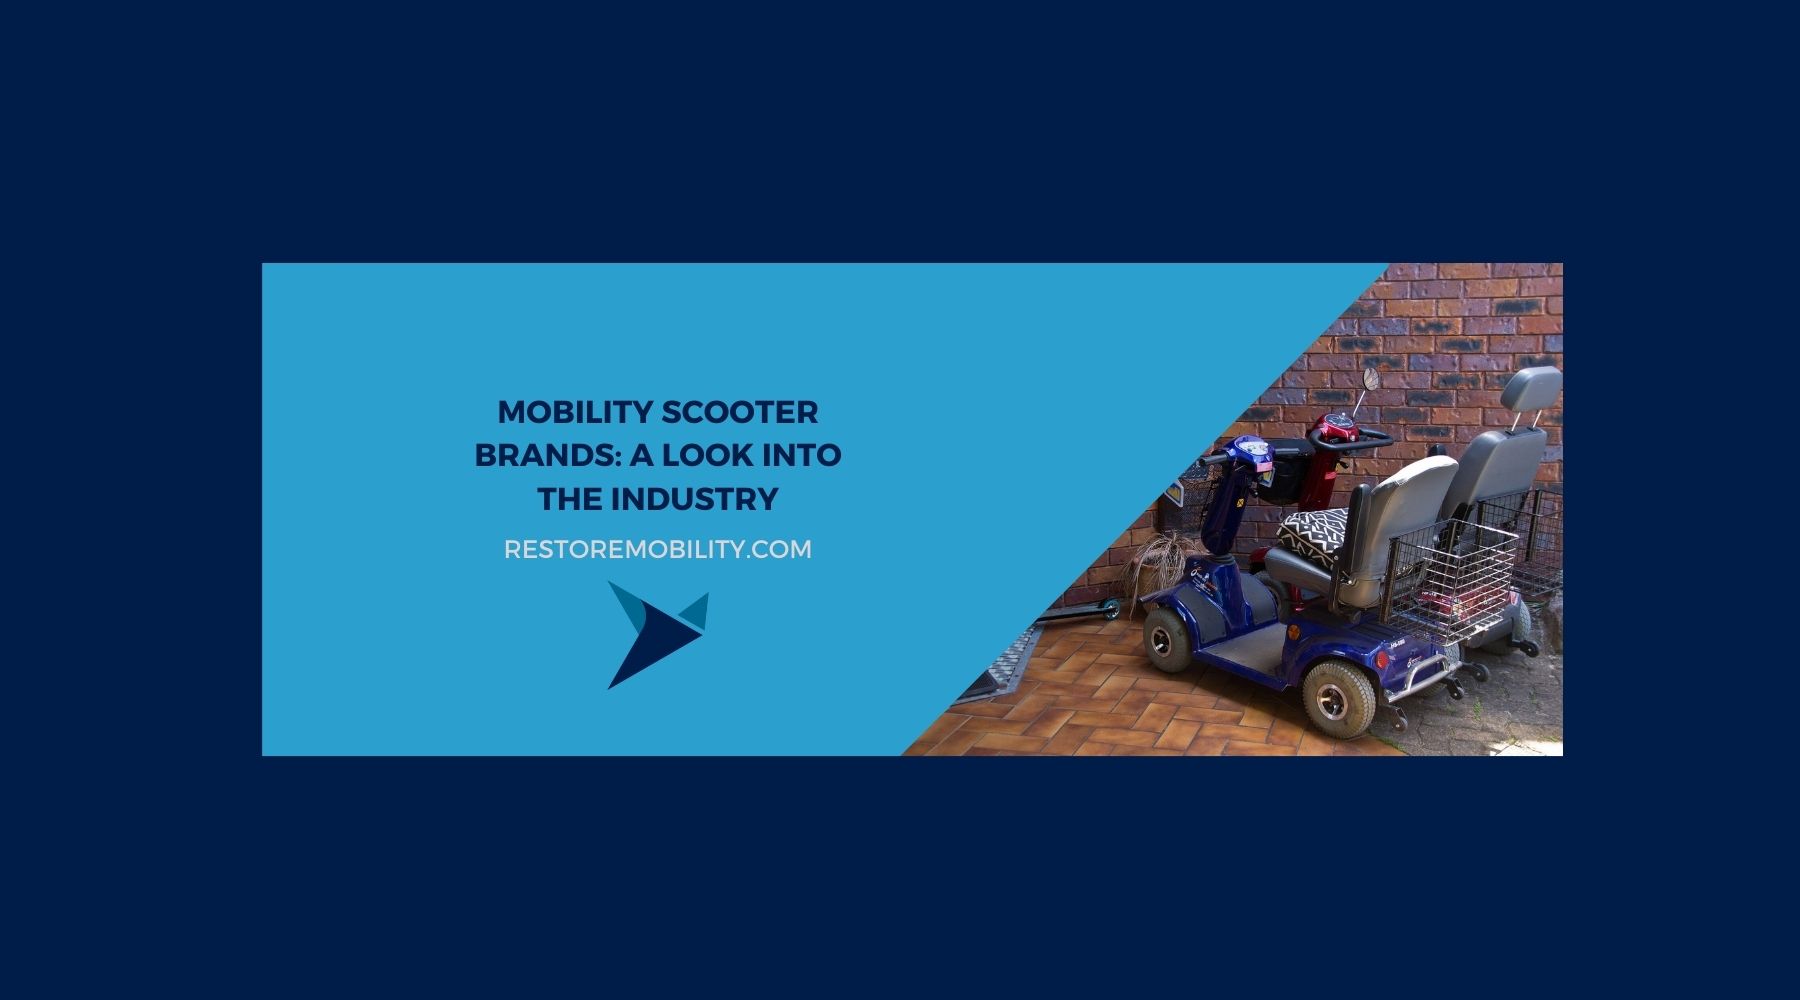 Leading Mobility Scooter Brands: A Look into the Industry